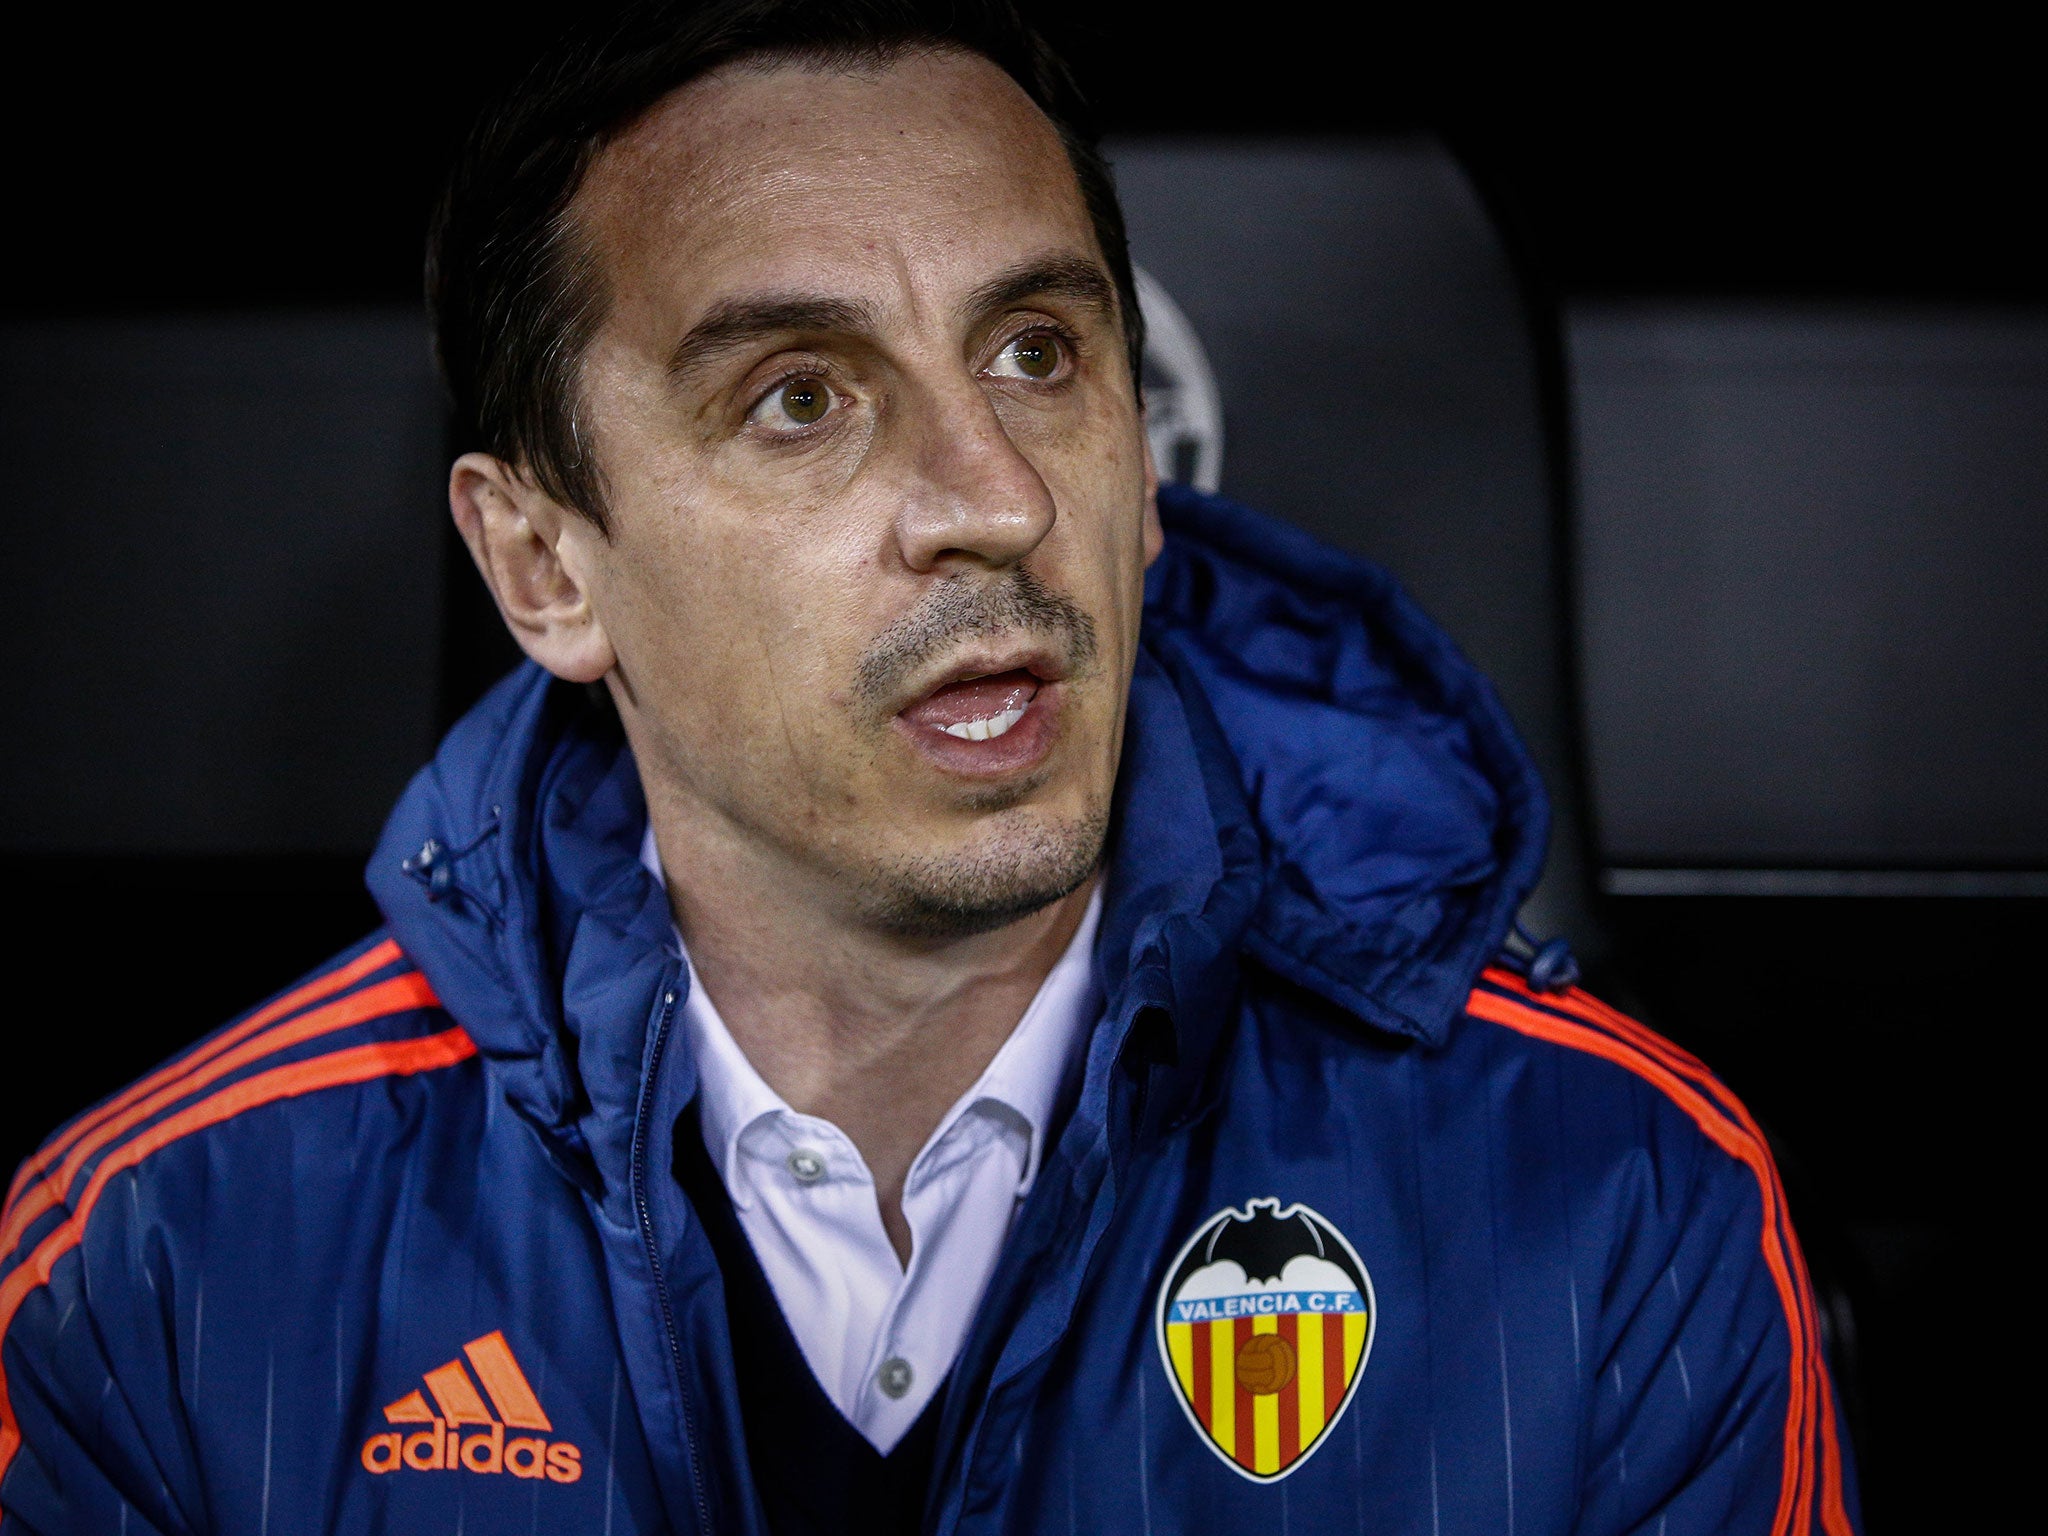 Gary Neville lost his job in Valenica as the team's manager